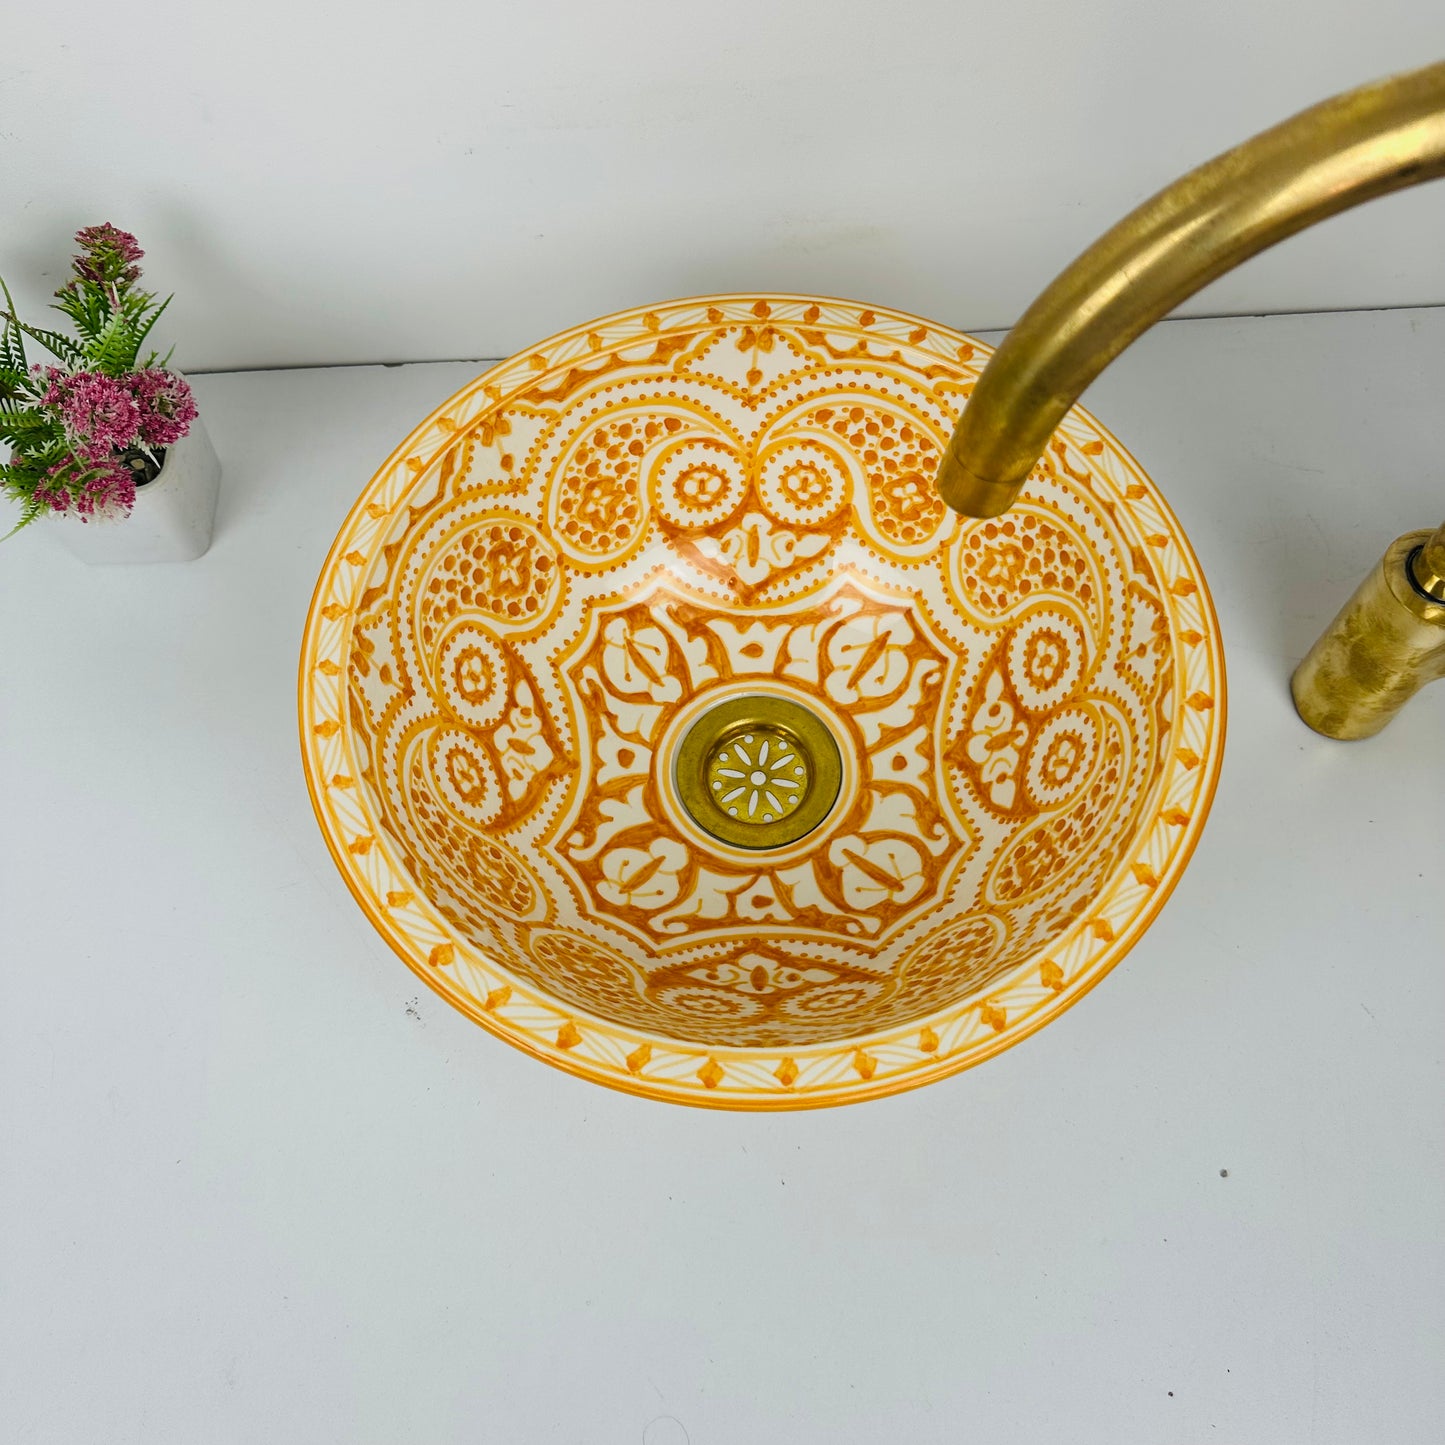 Artisan's Palette: Handcrafted Ceramic Sink with Vibrant orange Coloration